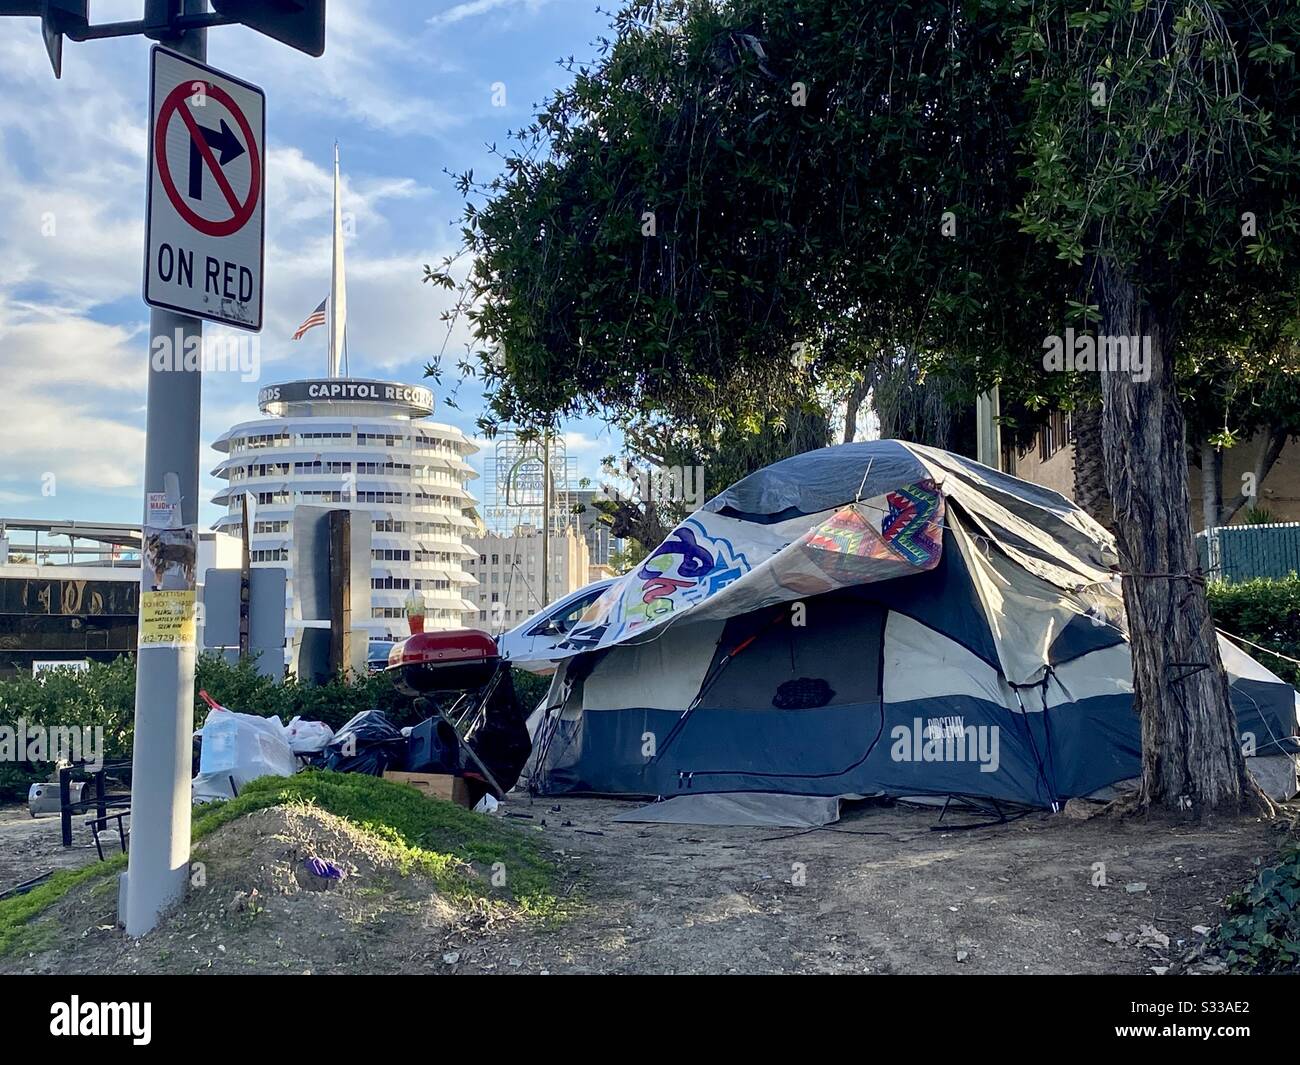 LOS ANGELES, CA, JAN 2020: close view homeless tent at the side of a street in Hollywood. Capital Records building in background Stock Photo